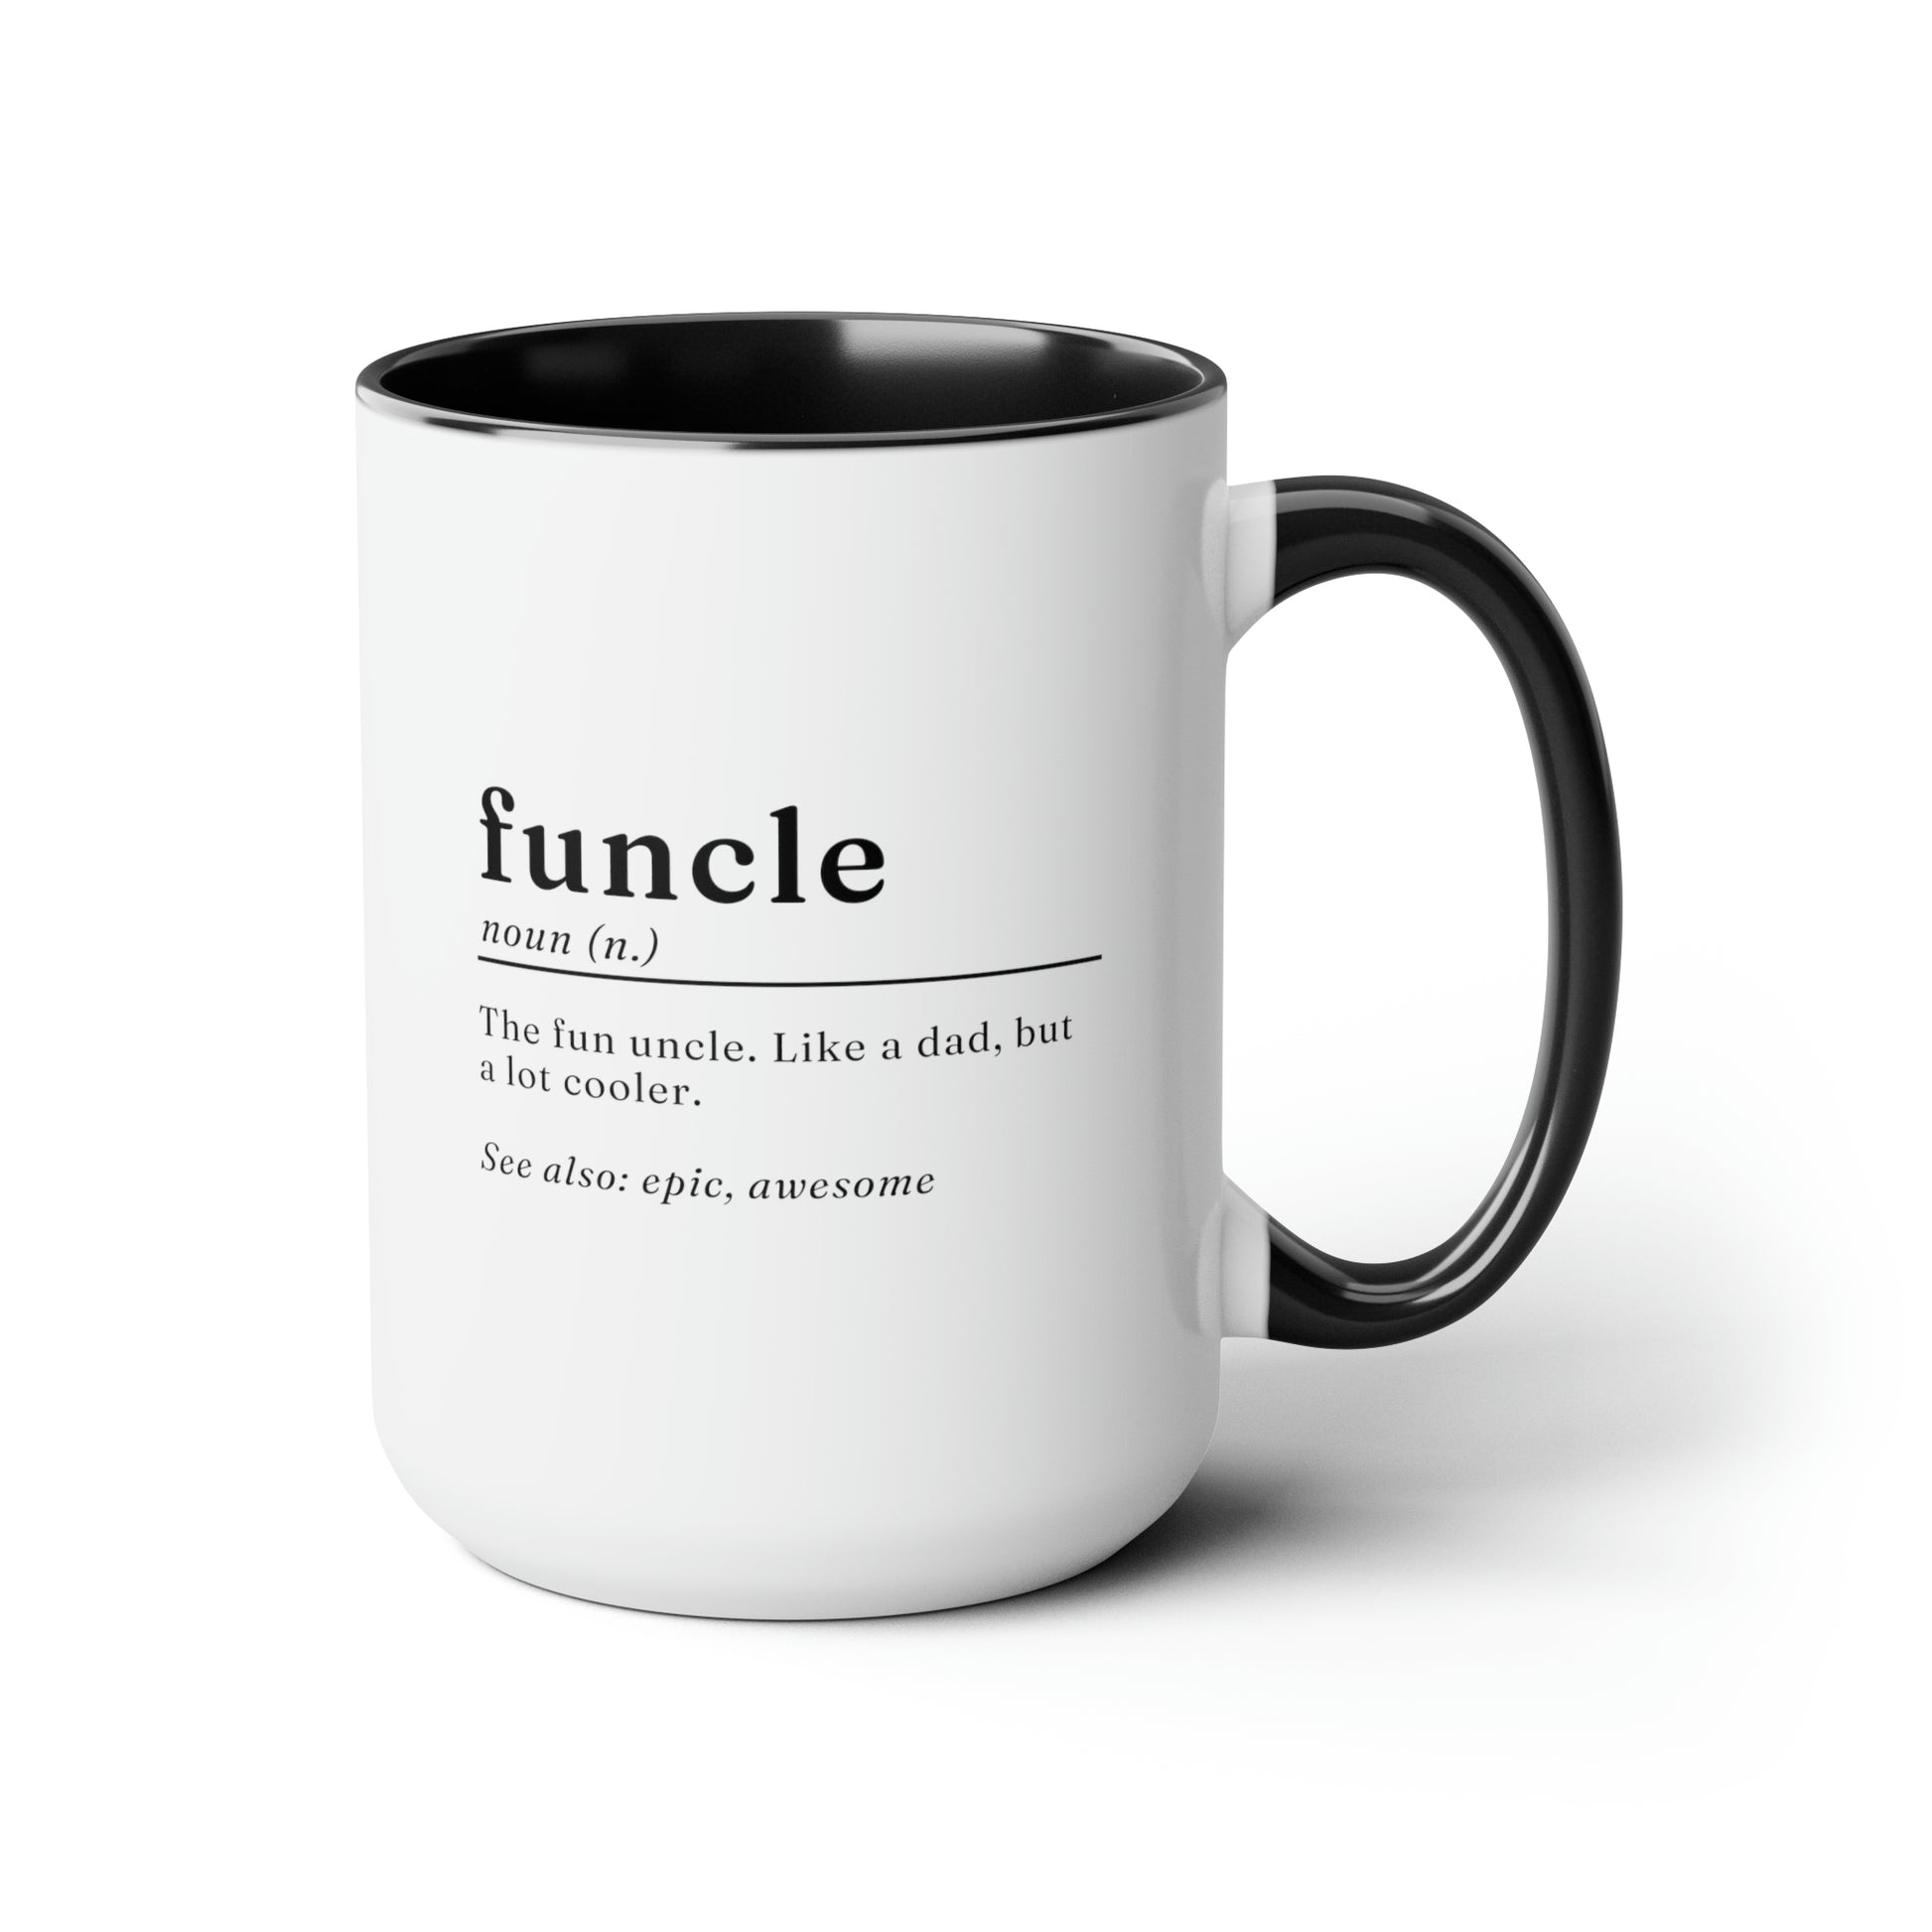 Funcle Definition 15oz white with black accent funny large coffee mug gift for fun uncle custom from niece nephew waveywares wavey wares wavywares wavy wares